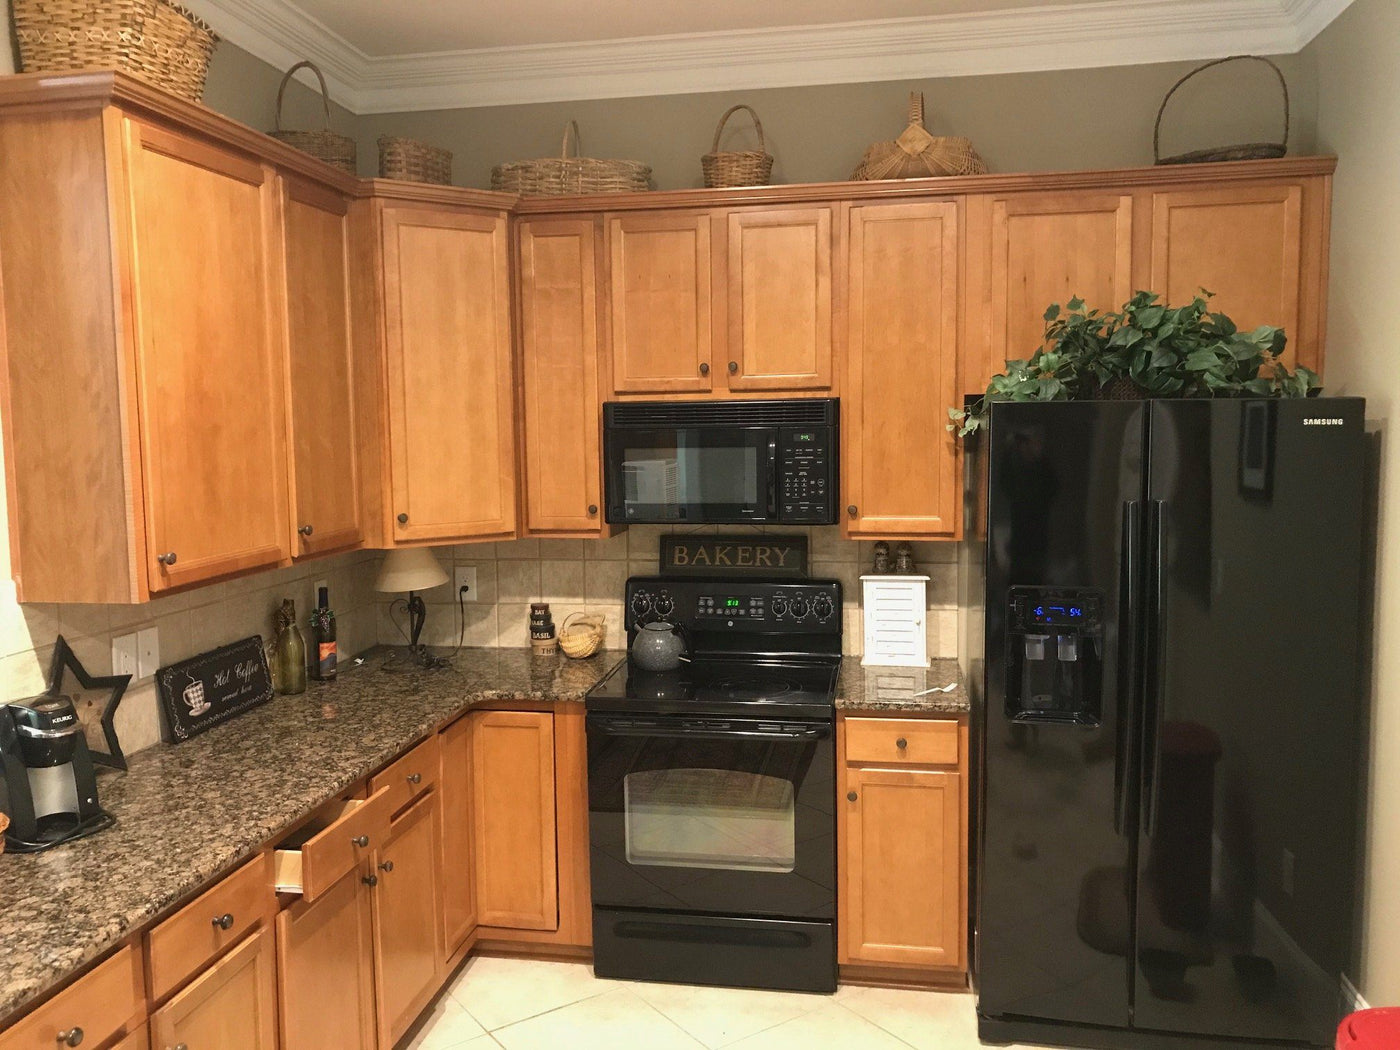 Cabinet Replacement Vs Refacing